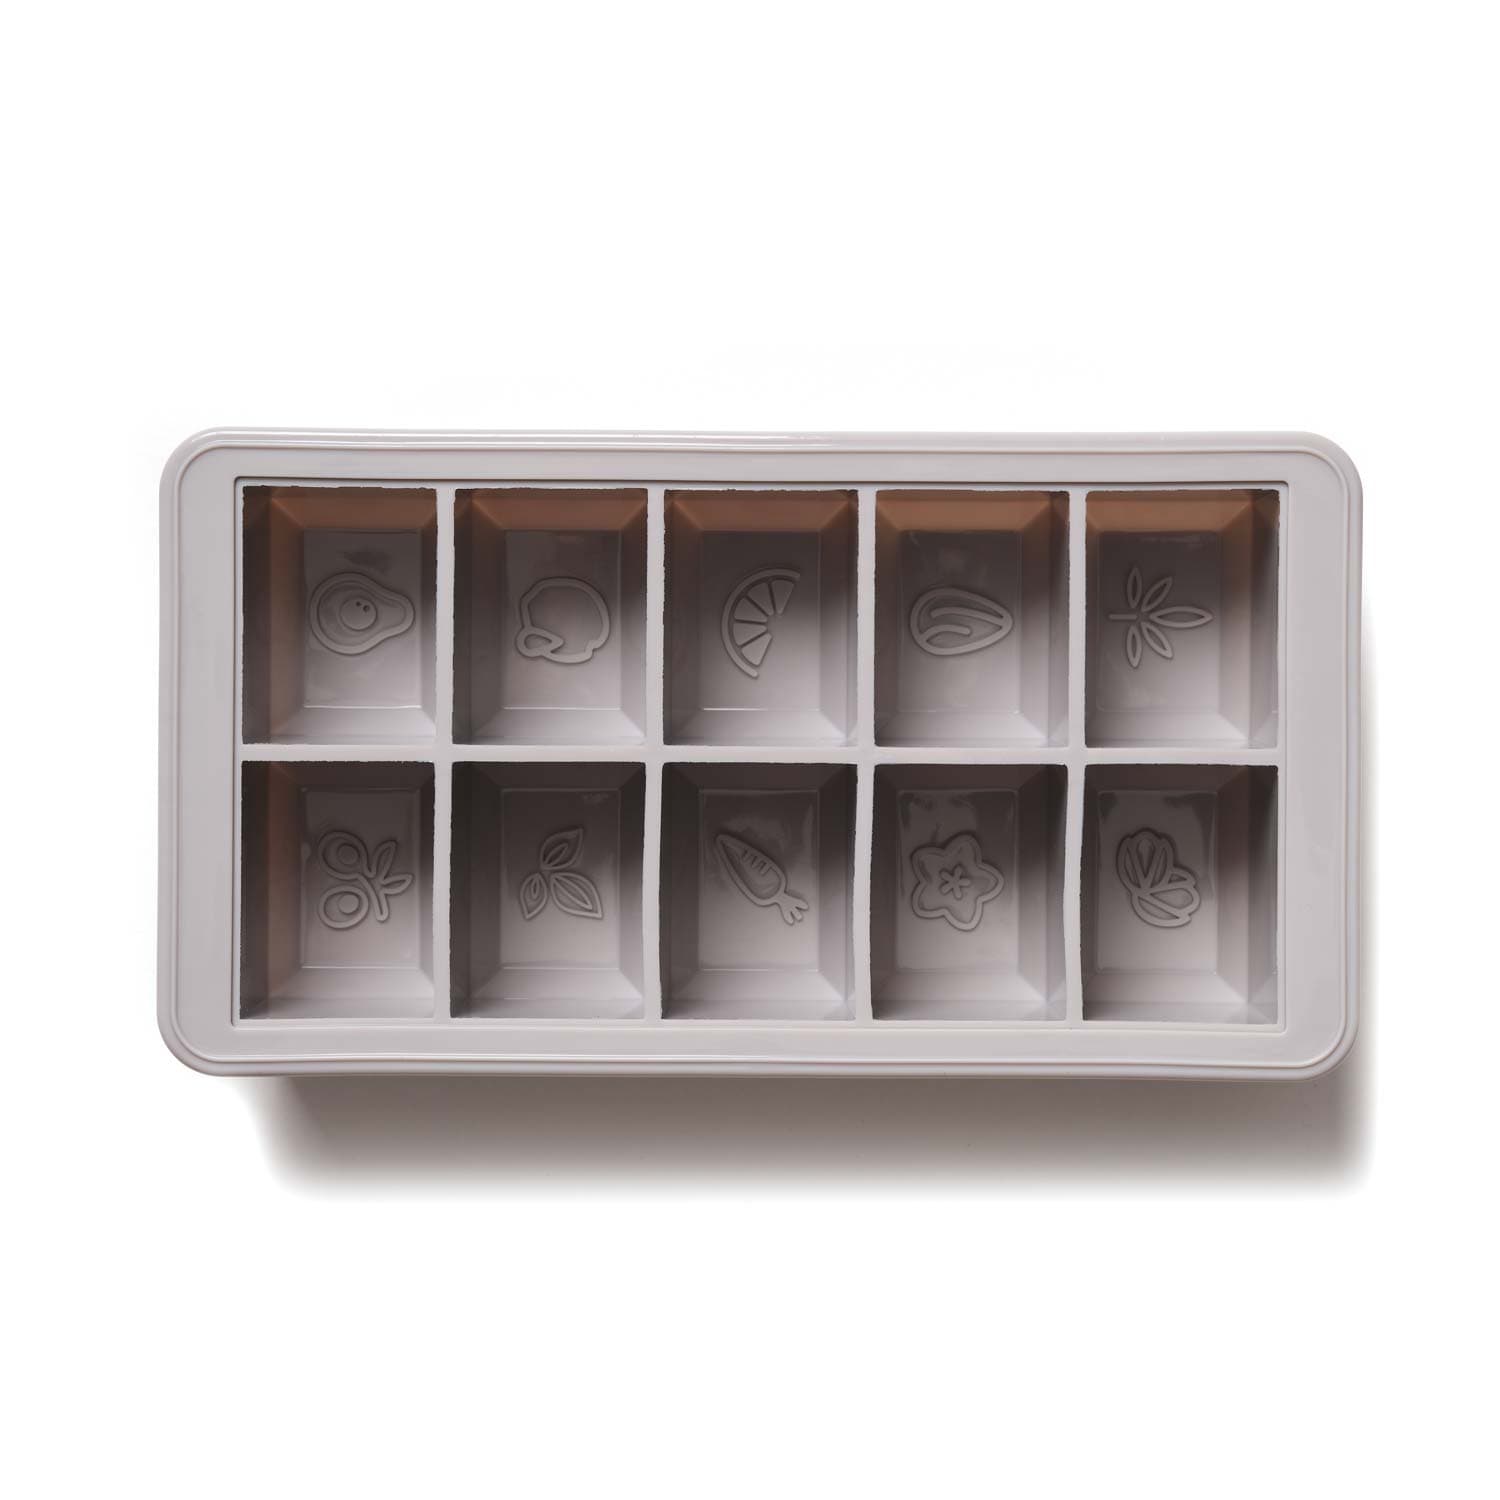 LEVO oil herb block tray in Grey without cap